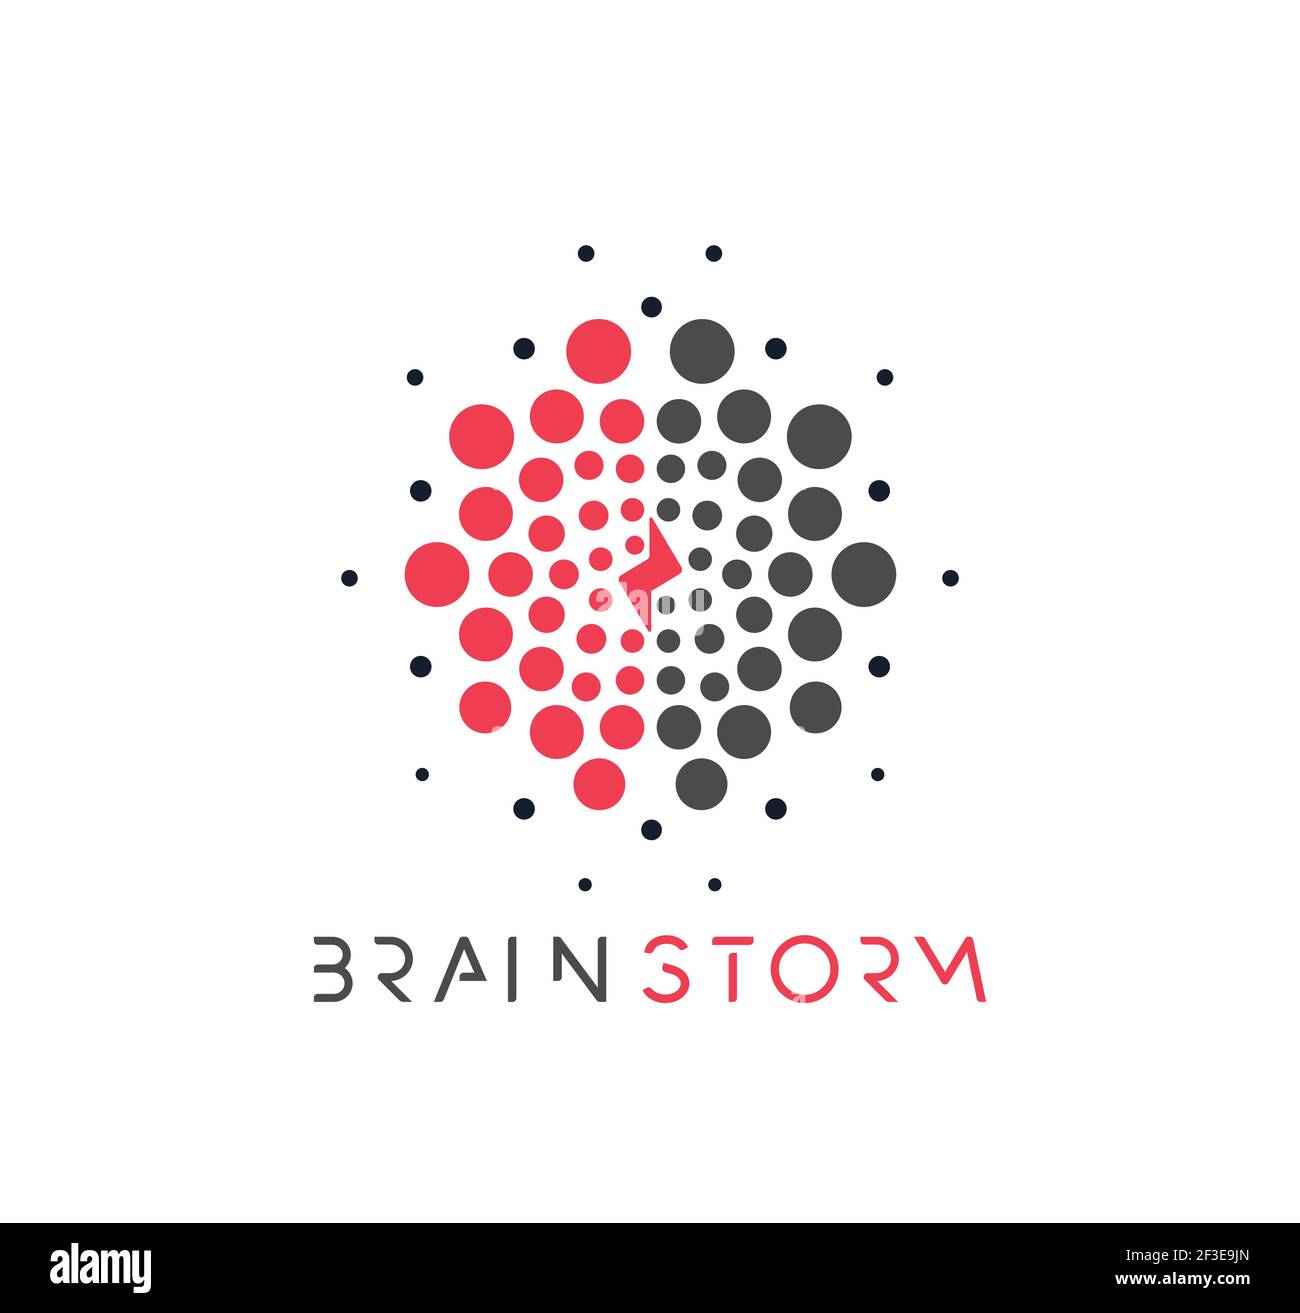 Brain vector logo concept. Brainstorm, creative thinking or learning dotted vector icon on white background. Inspiration, mind power illustration for Stock Vector